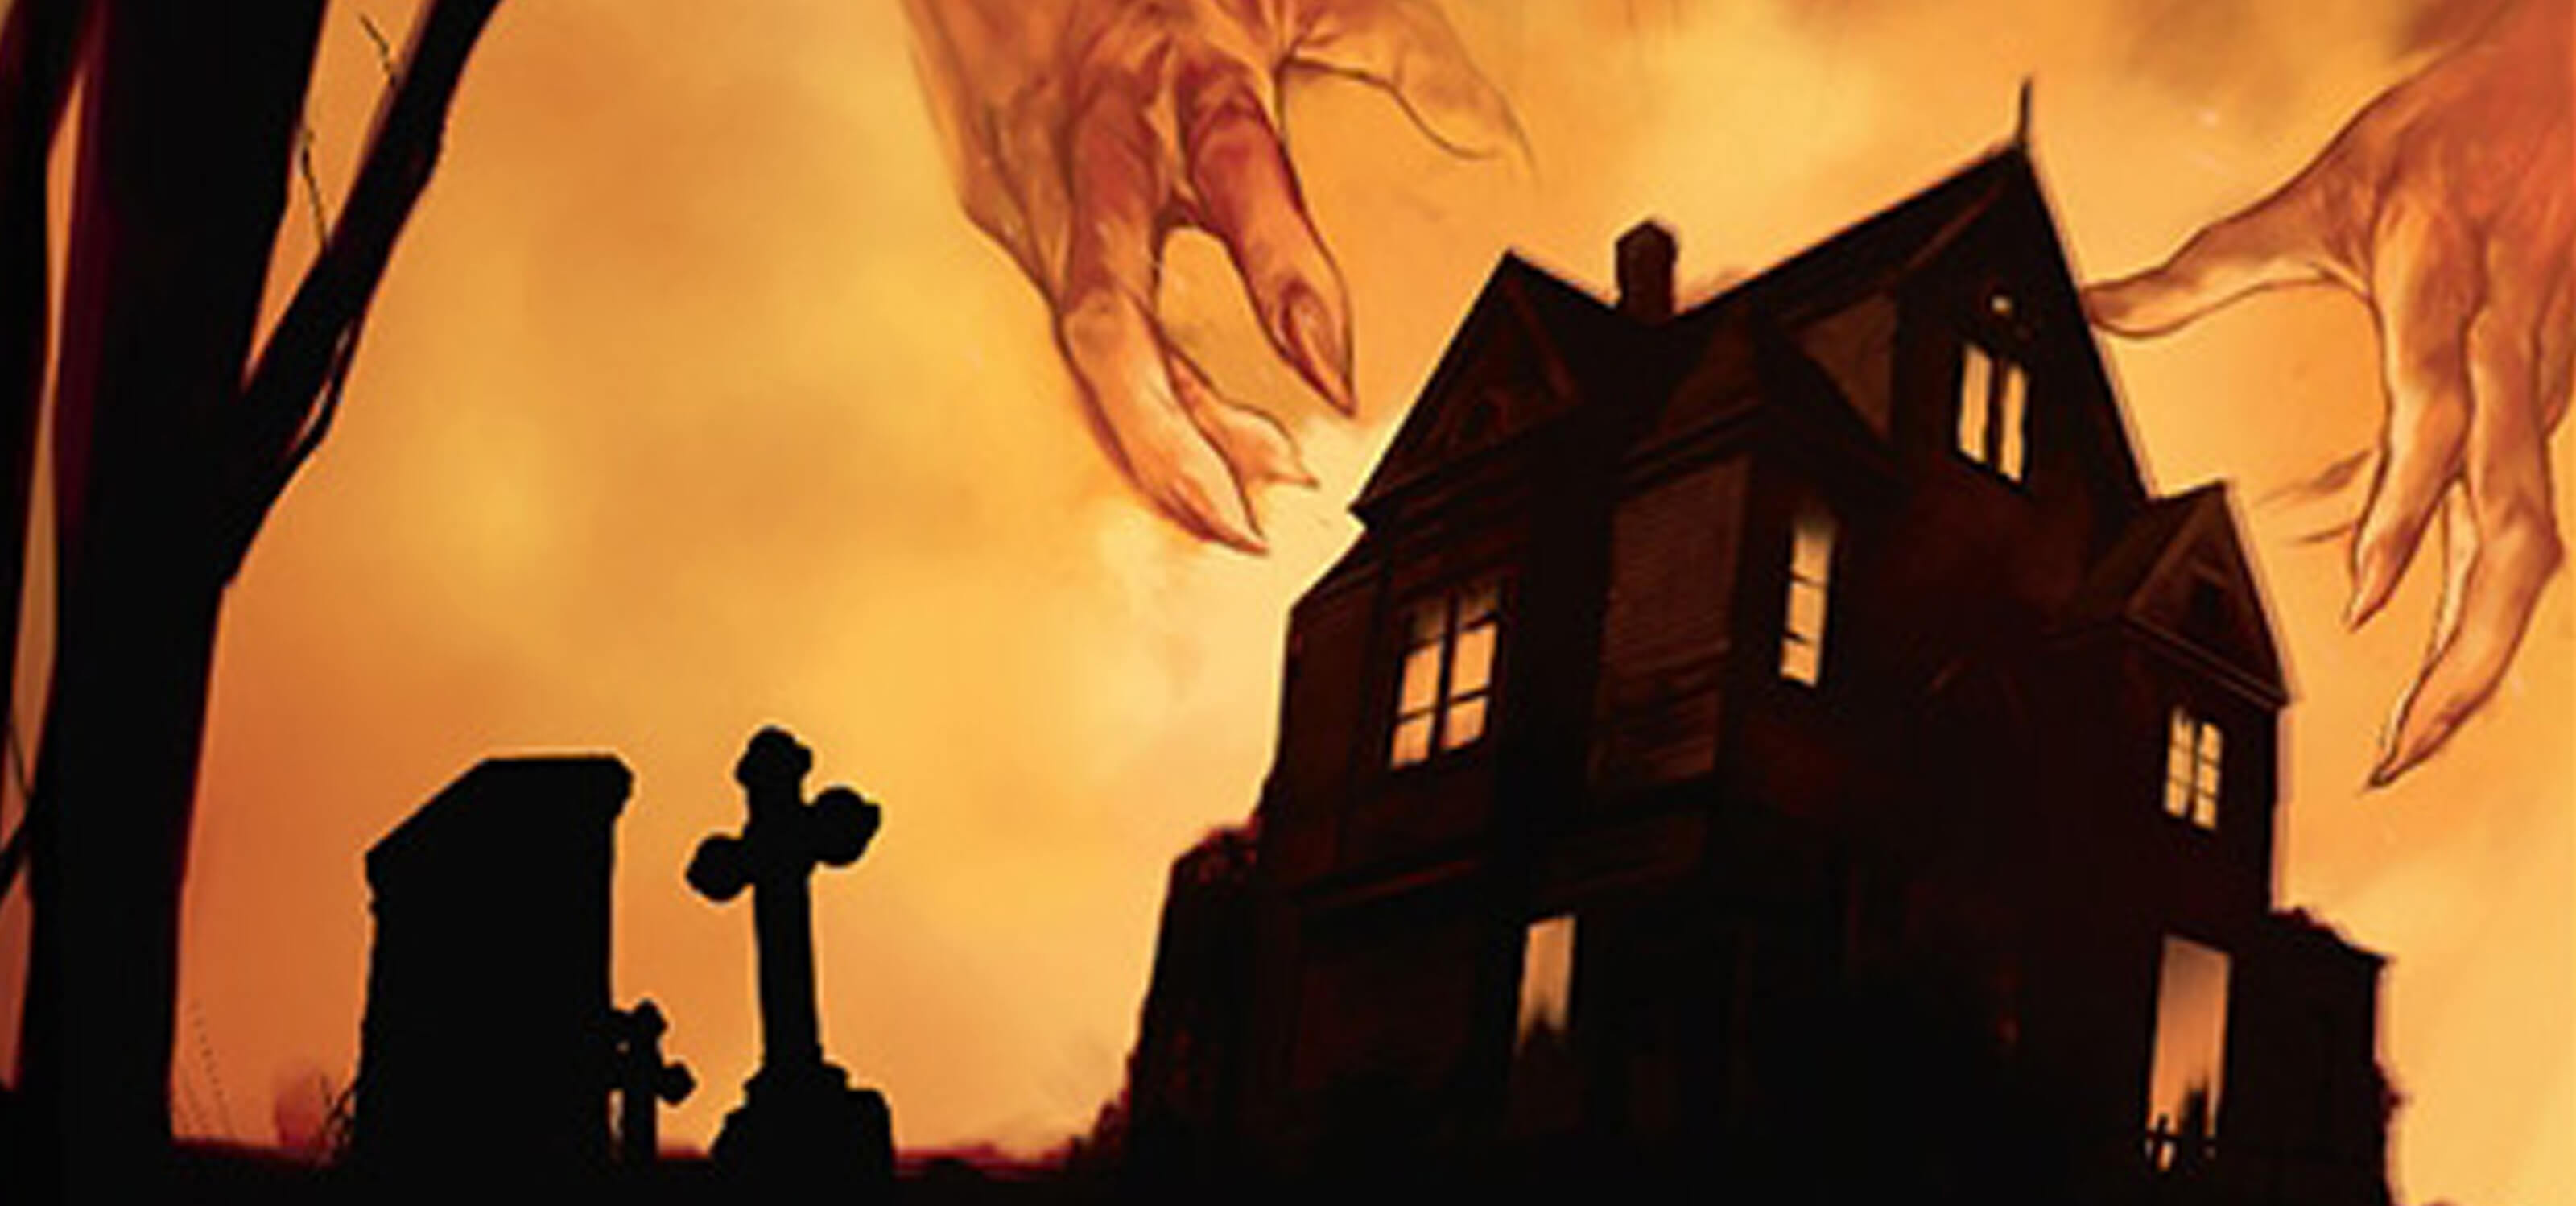 Illustration of a spooky house and giant claw-like hands featured on the box of Betrayal at House on the Hill